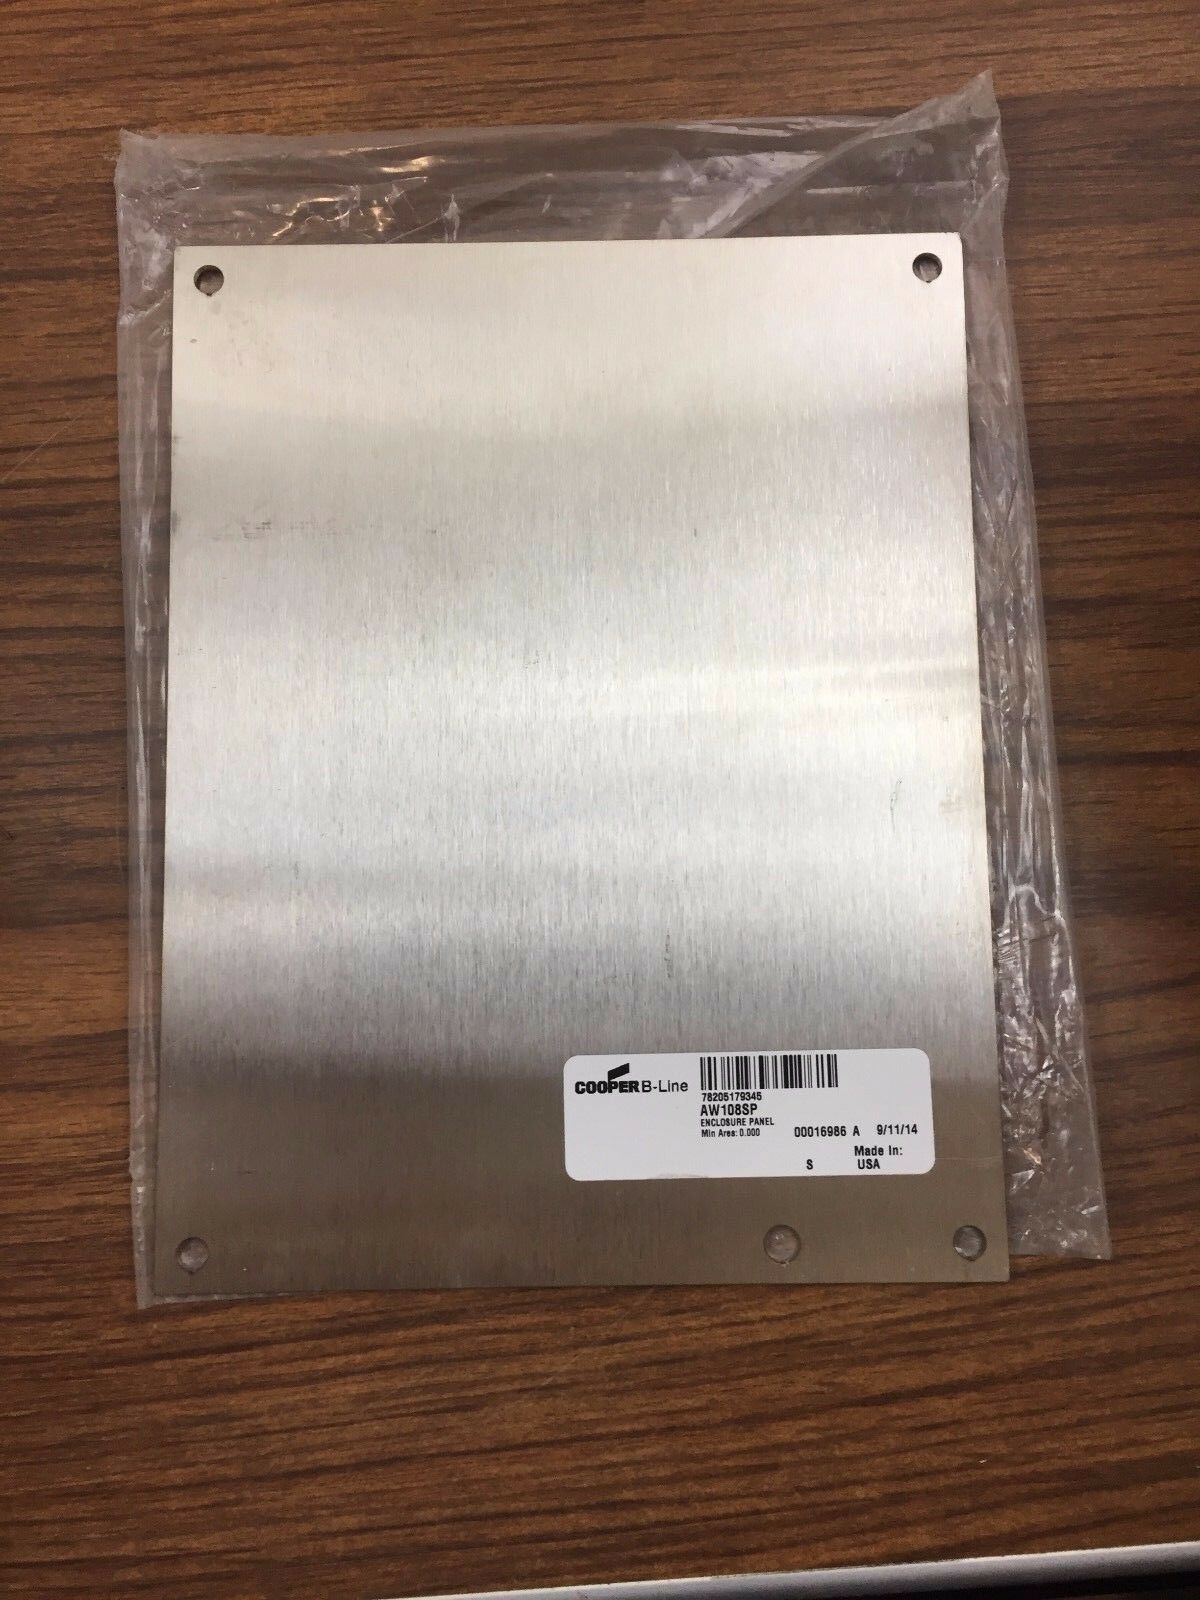 Cooper B-line Aw108sp 10 X 8 Inch Jic Stainless Steel Panel For Enclosure